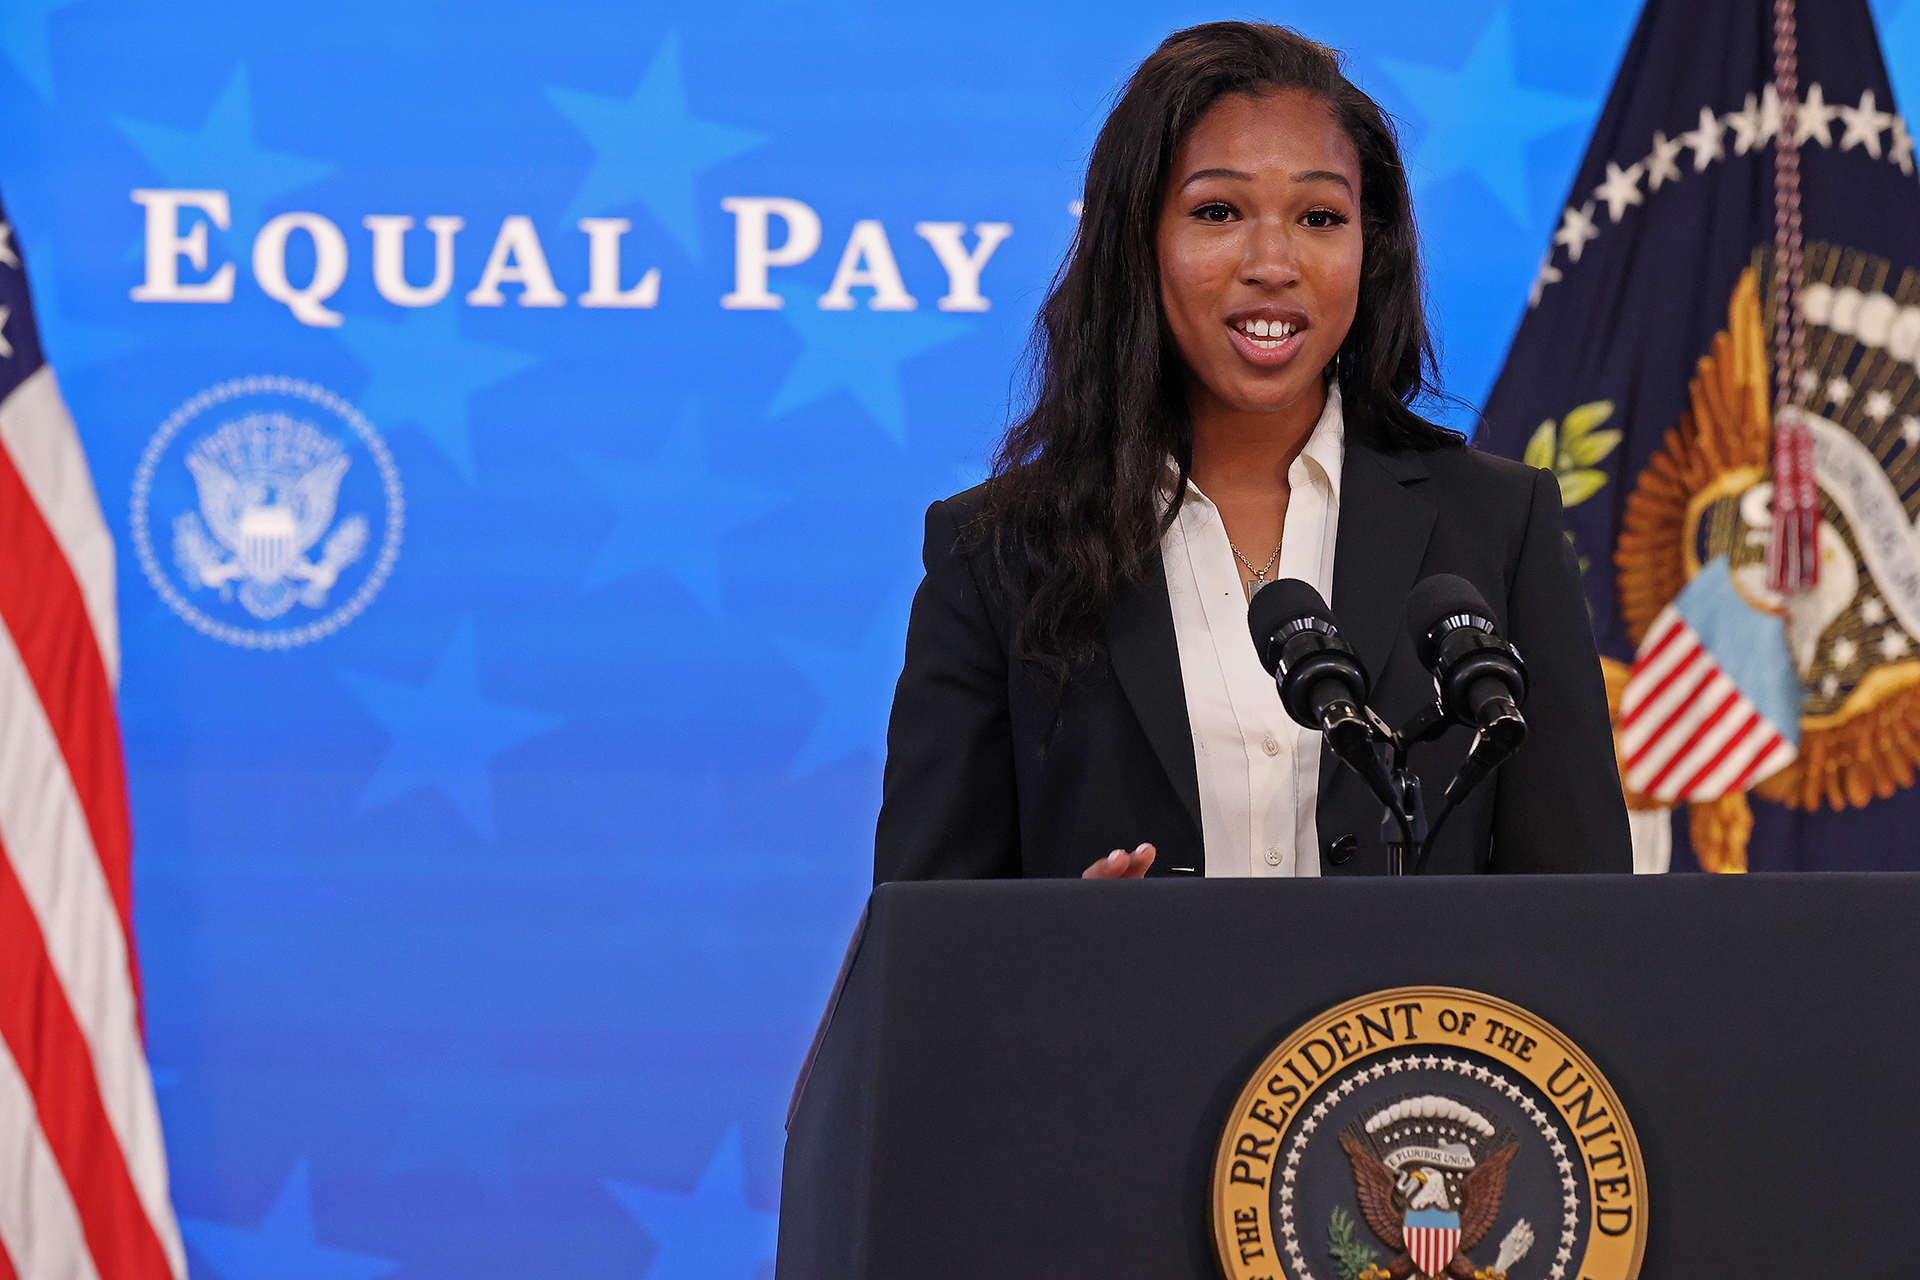 Soccer superstar Margaret Purce delivers remarks during an event to mark Equal Pay Day.